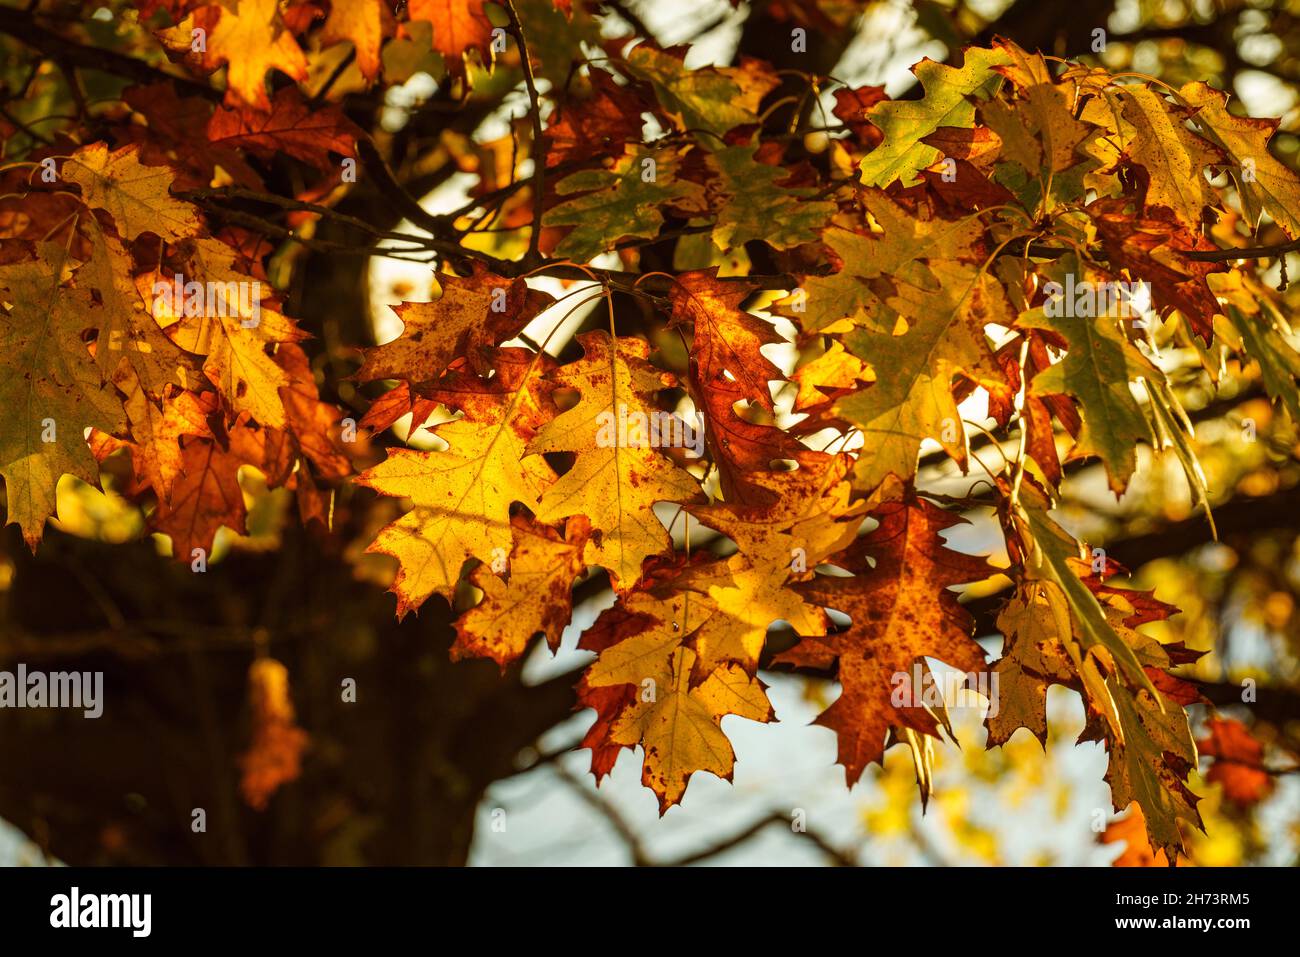 Autumn oak leaves close-up on the tree backlighted Stock Photo